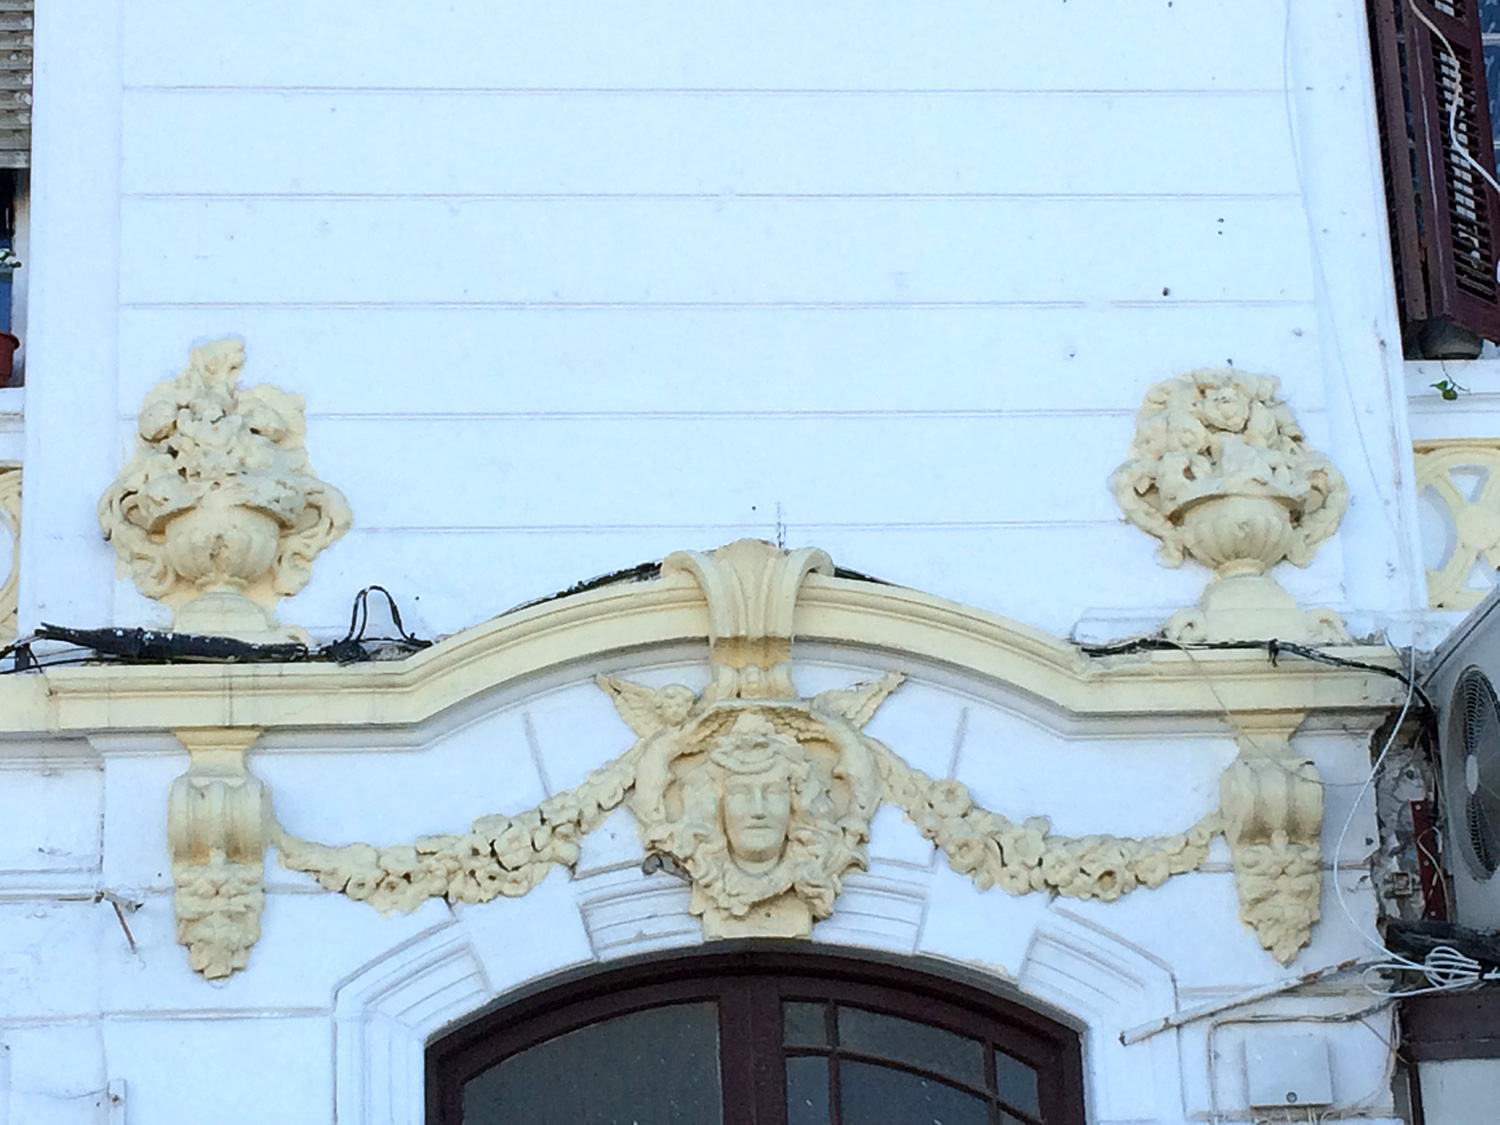 Detail view of decoration above a window on the facade